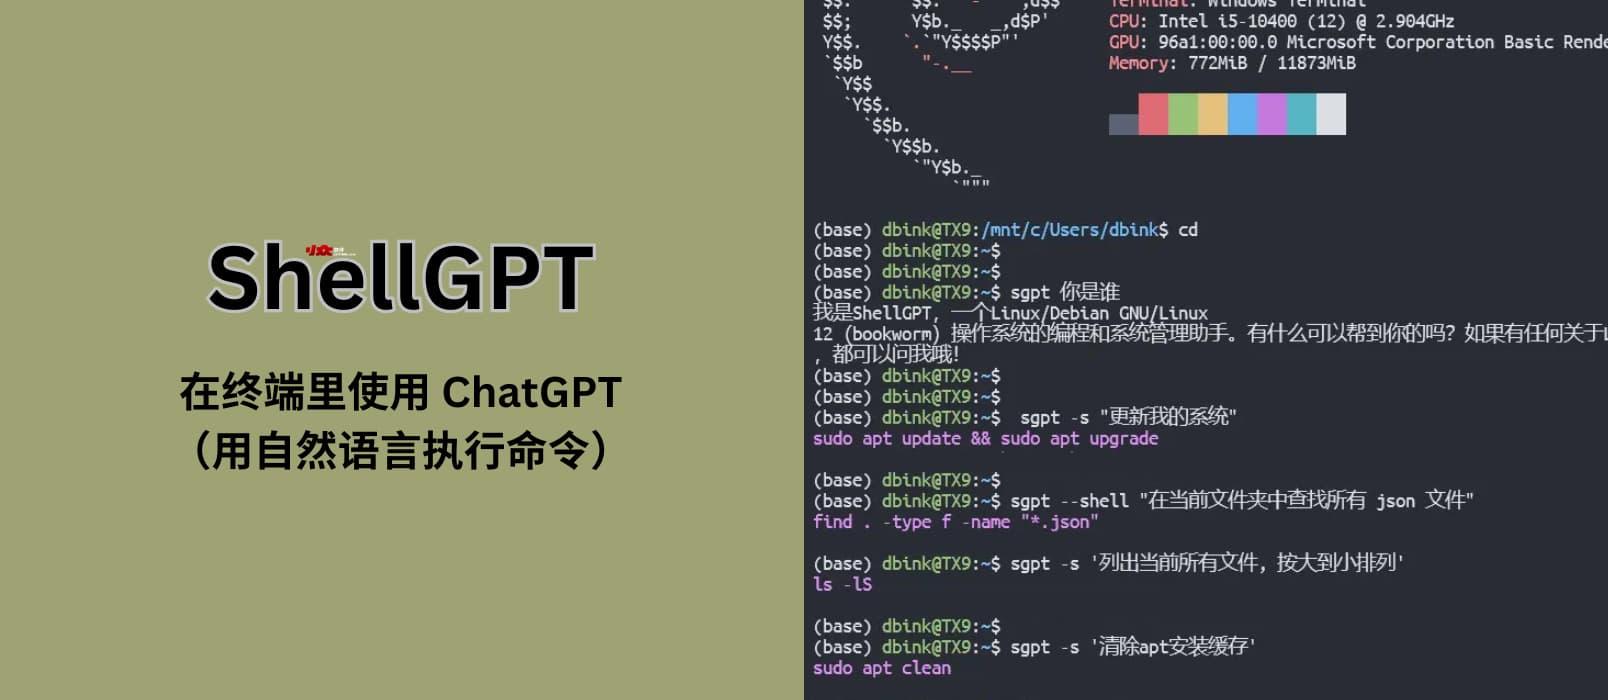 ShellGPT - Use ChatGPT in the Terminal (Execute Commands in Natural Language): Update My System, List Files from Largest to Smallest, Help Me Install Docker... 1